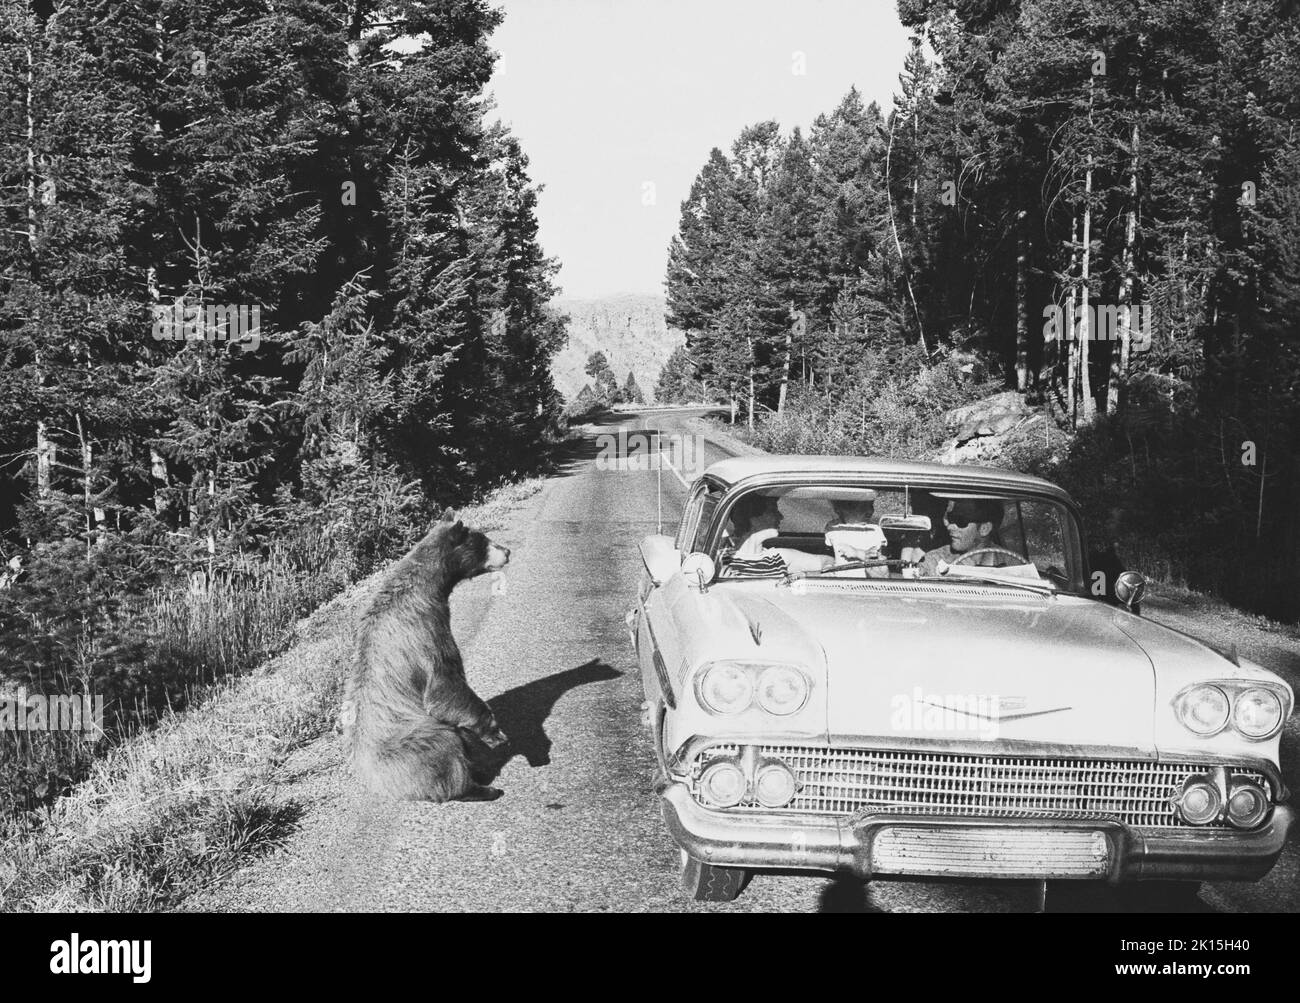 Brown bear begs in Yellowstone National Park, Wyoming in late 1950's. Car is a 1958 Chevrolet. Stock Photo